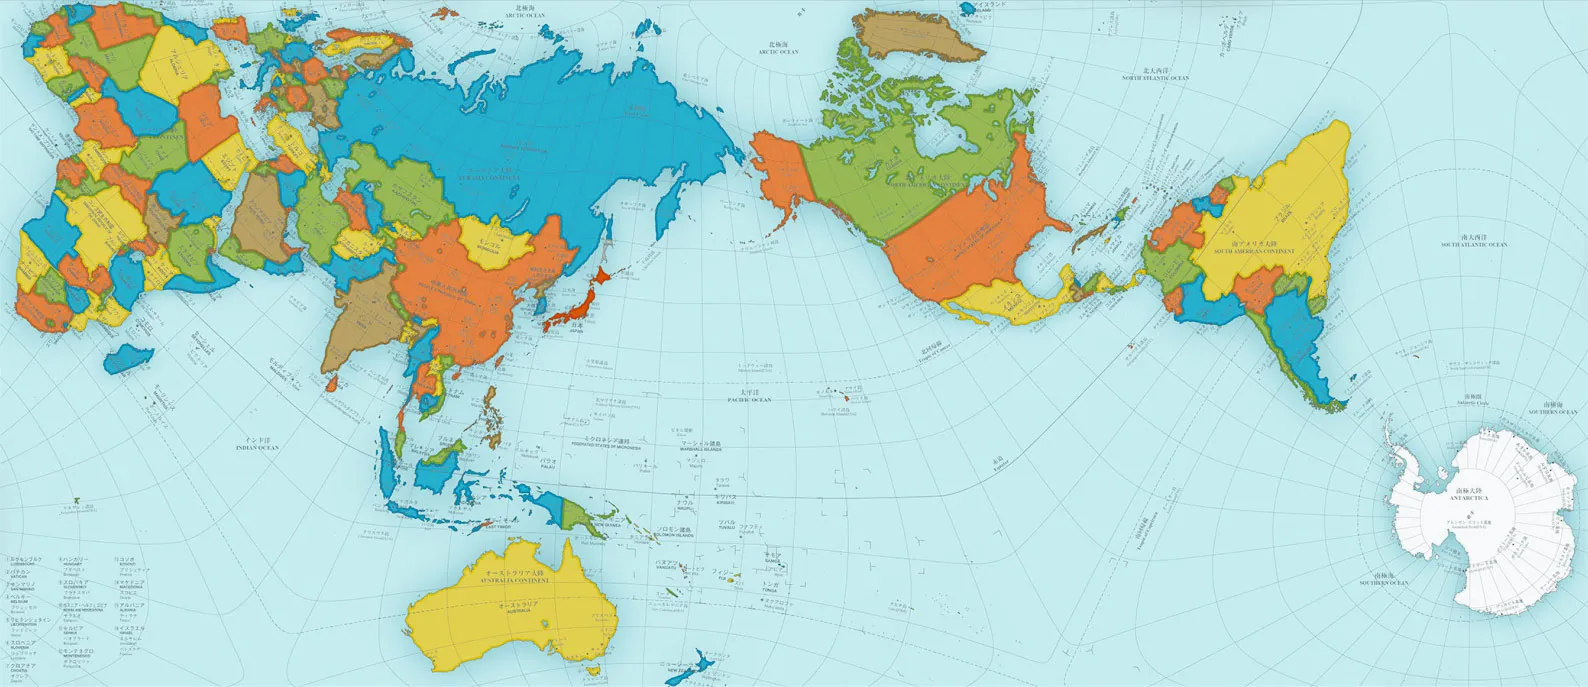 <p>It is considered the most accurate projection for its way of showing relative areas of landmasses and oceans with very little distortion of shapes</p>